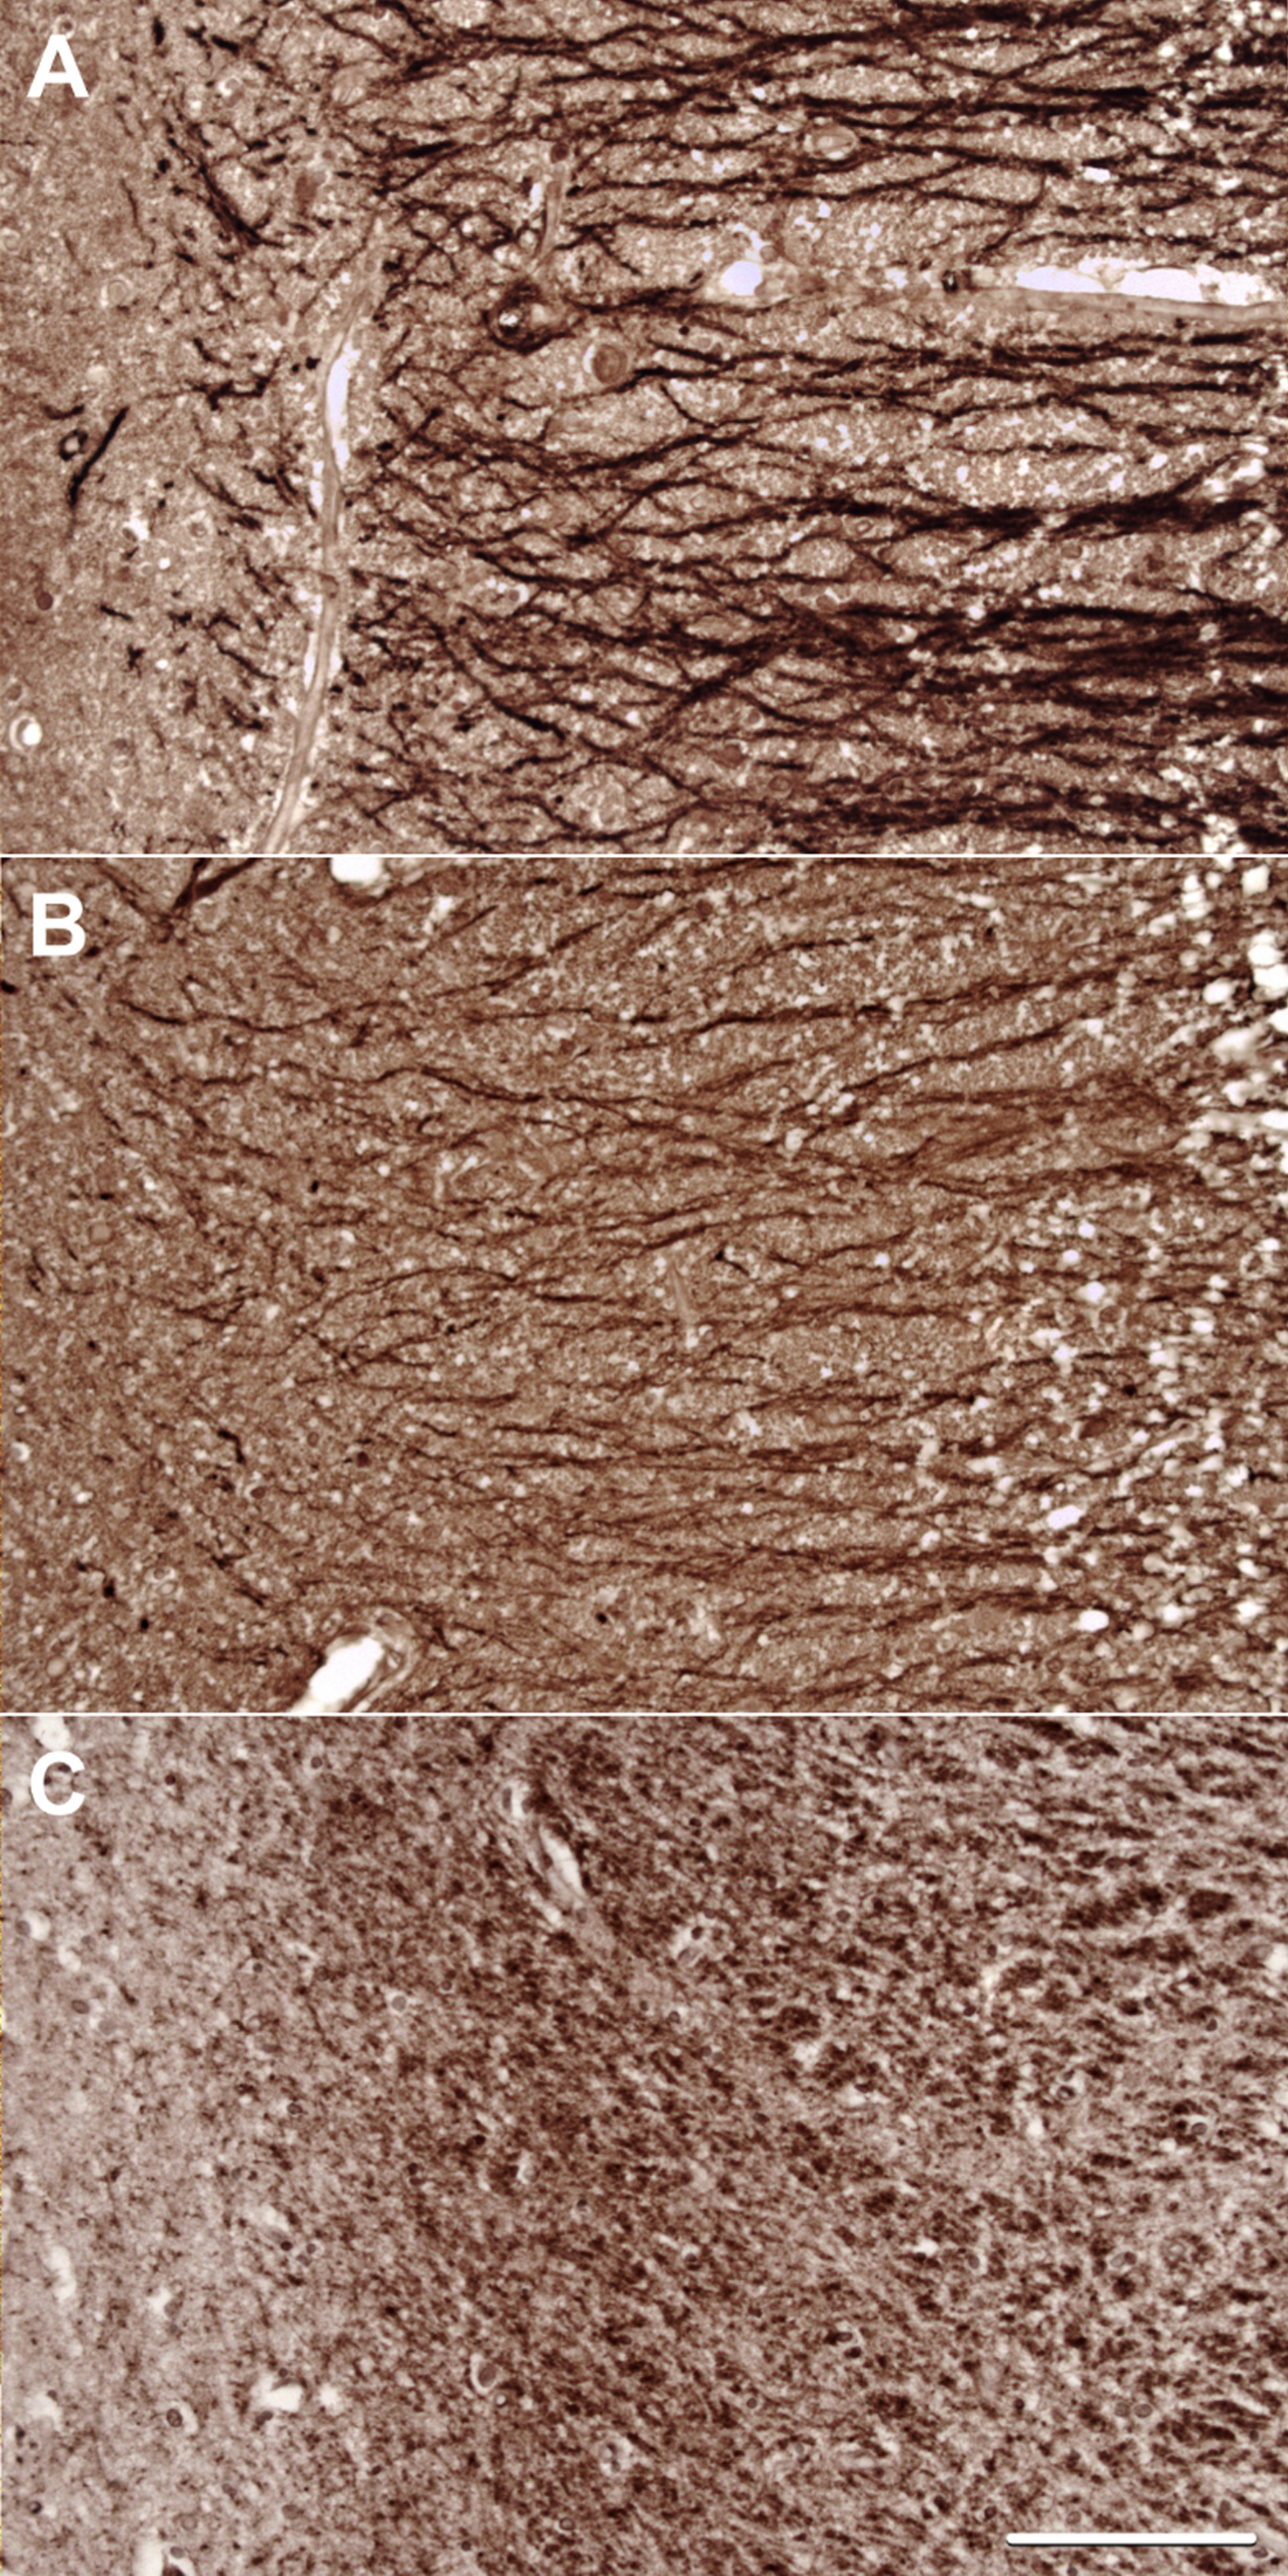 Representative images of staining for (A) MAP2, (B) Drebrin, and (C) PSD-95 in the stratum radiatum of CA1.